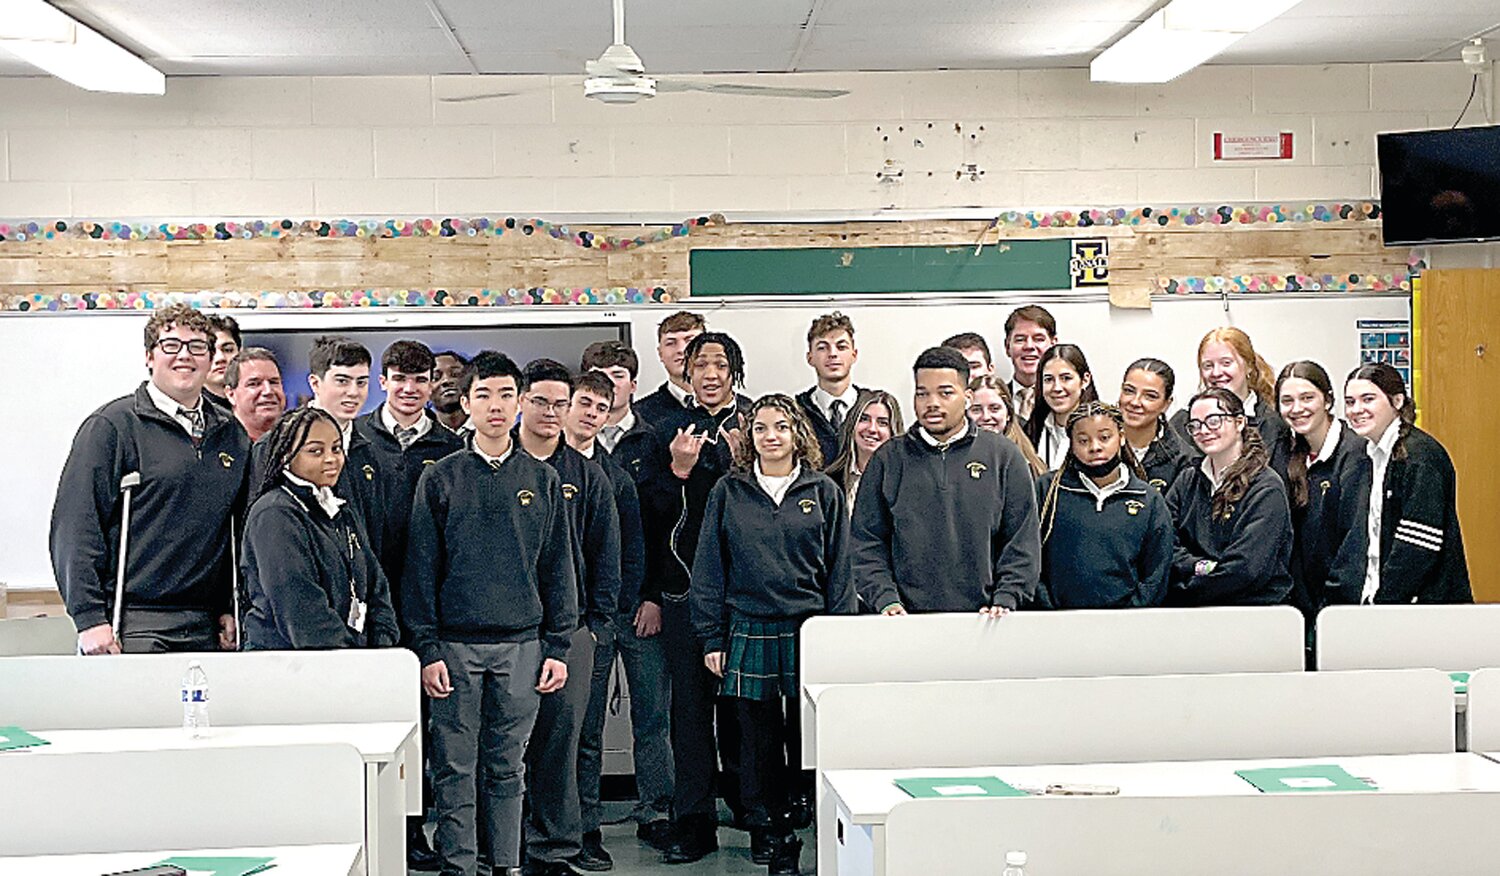 Dan McPhillips gathers with the students from the Fundamentals of Real Estate elective course at Archbishop Wood.